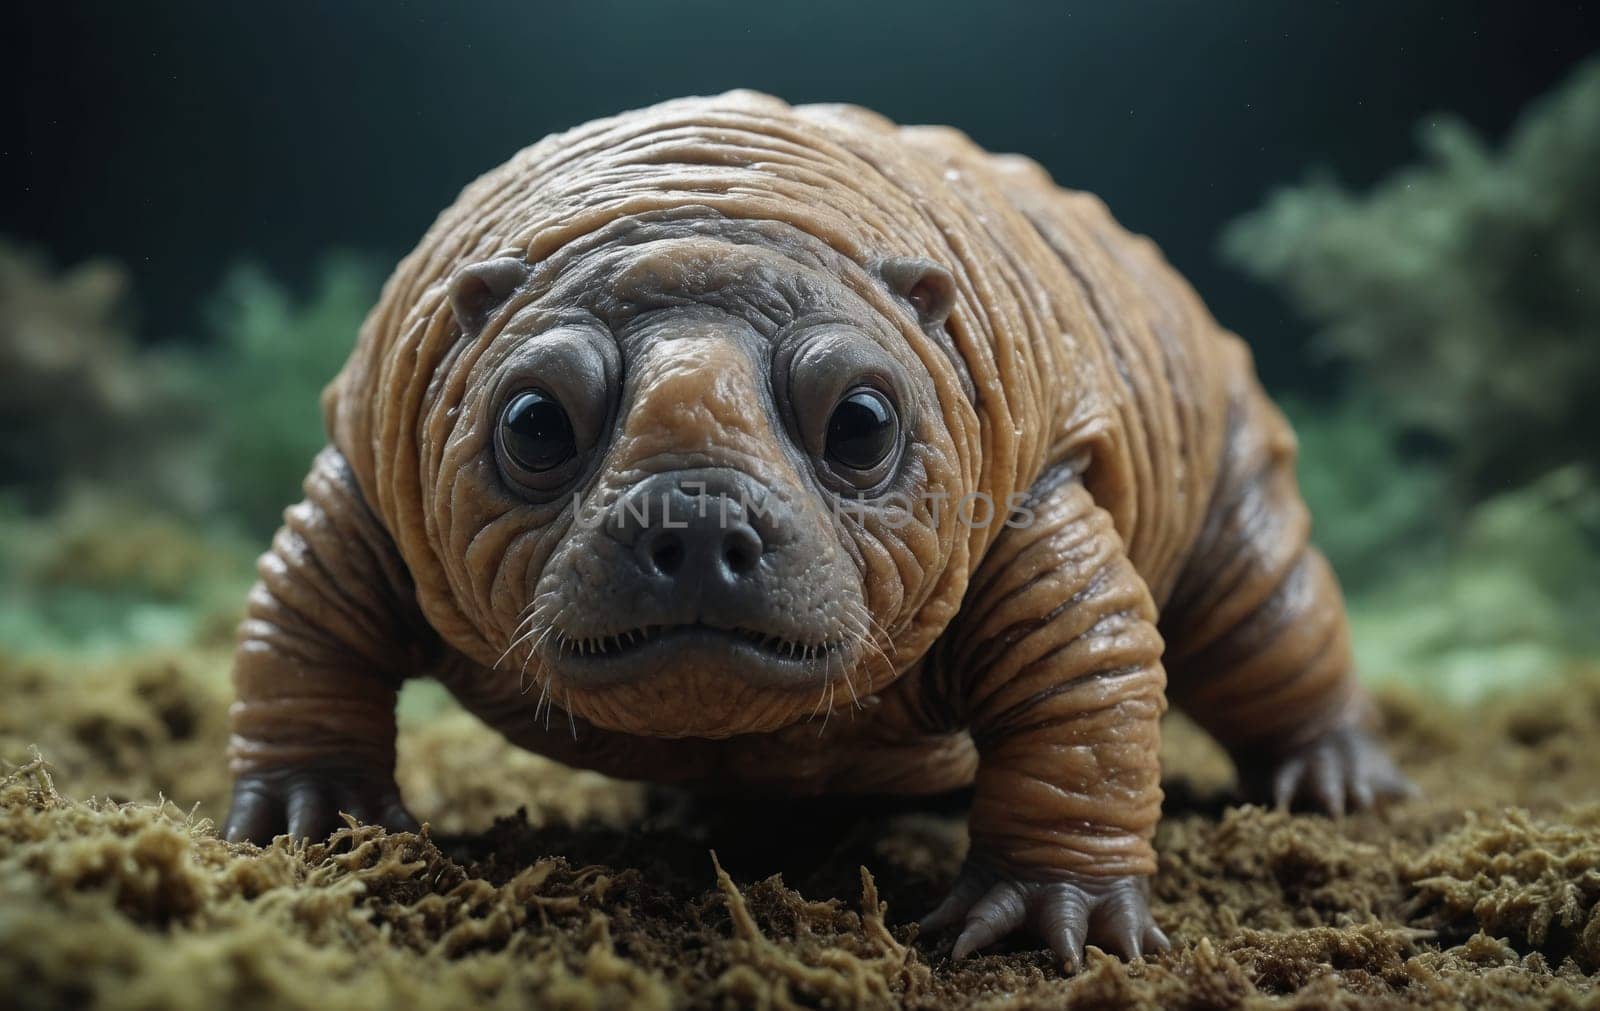 A small brown organism, resembling a terrestrial animal, is crawling on the ground. It moves in a spiral motion, blending in with the natural material around